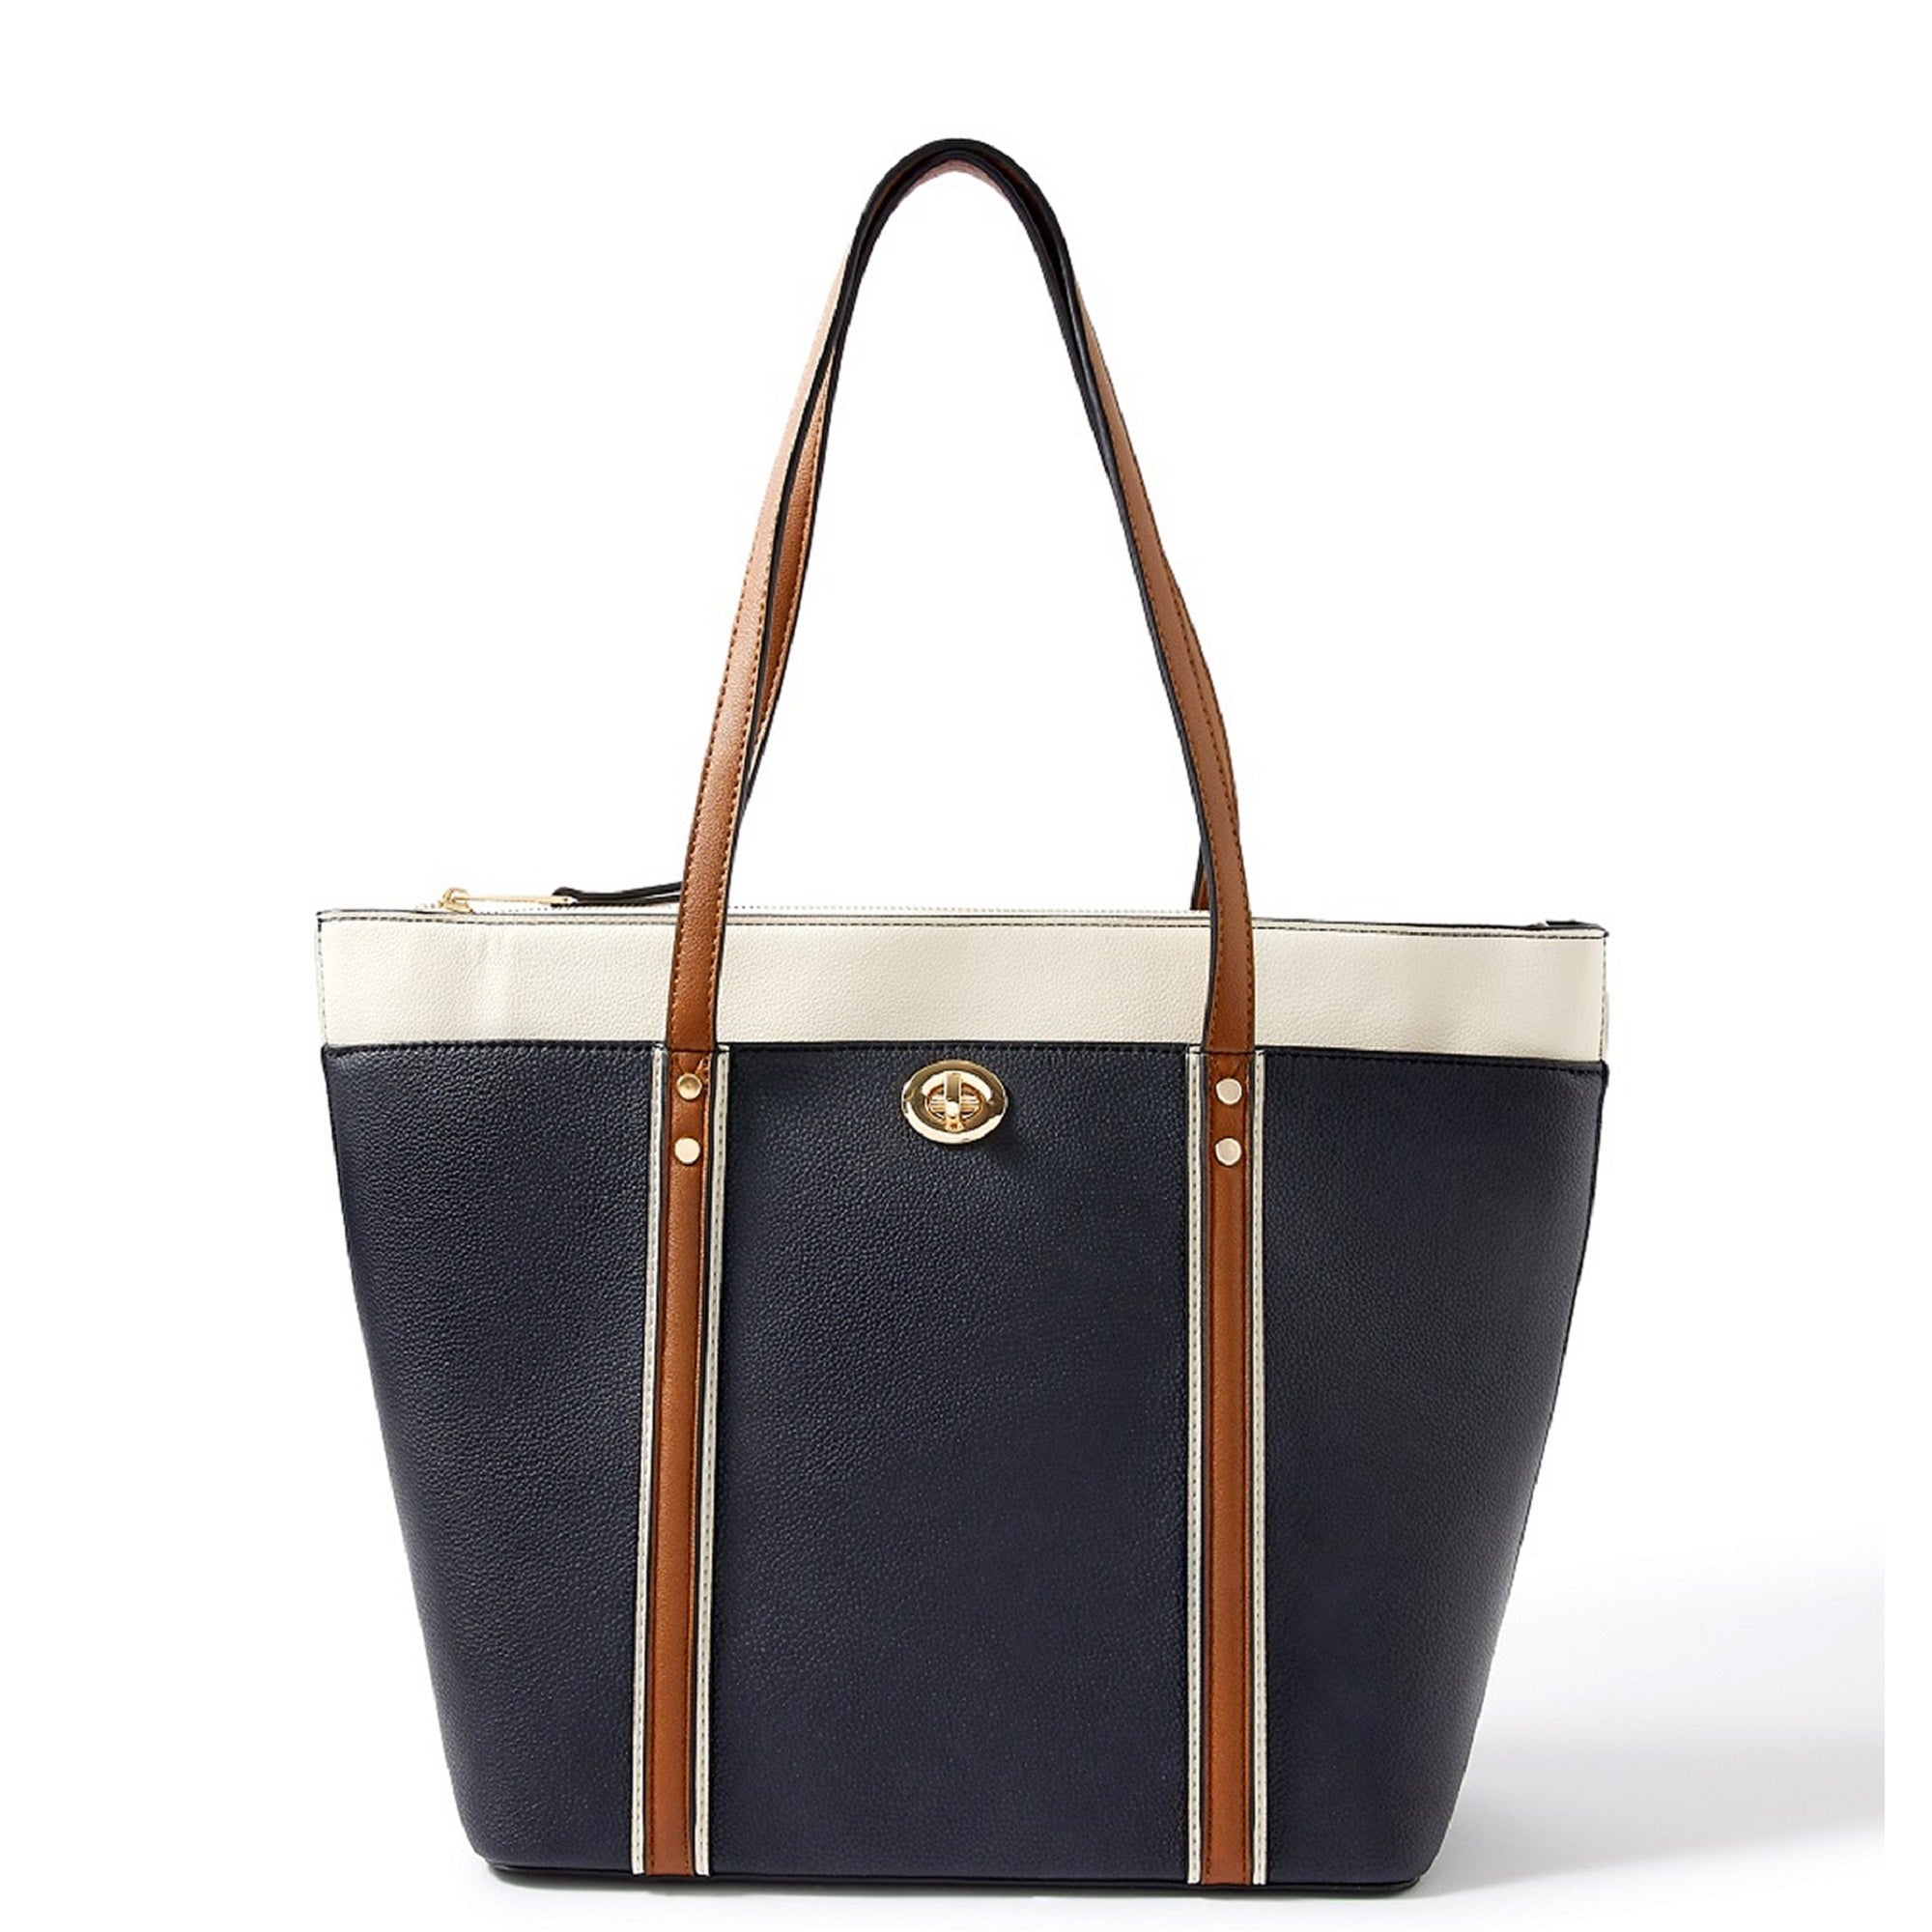 Accessorize London women's Faux Leather Blue Maddox Tote bag